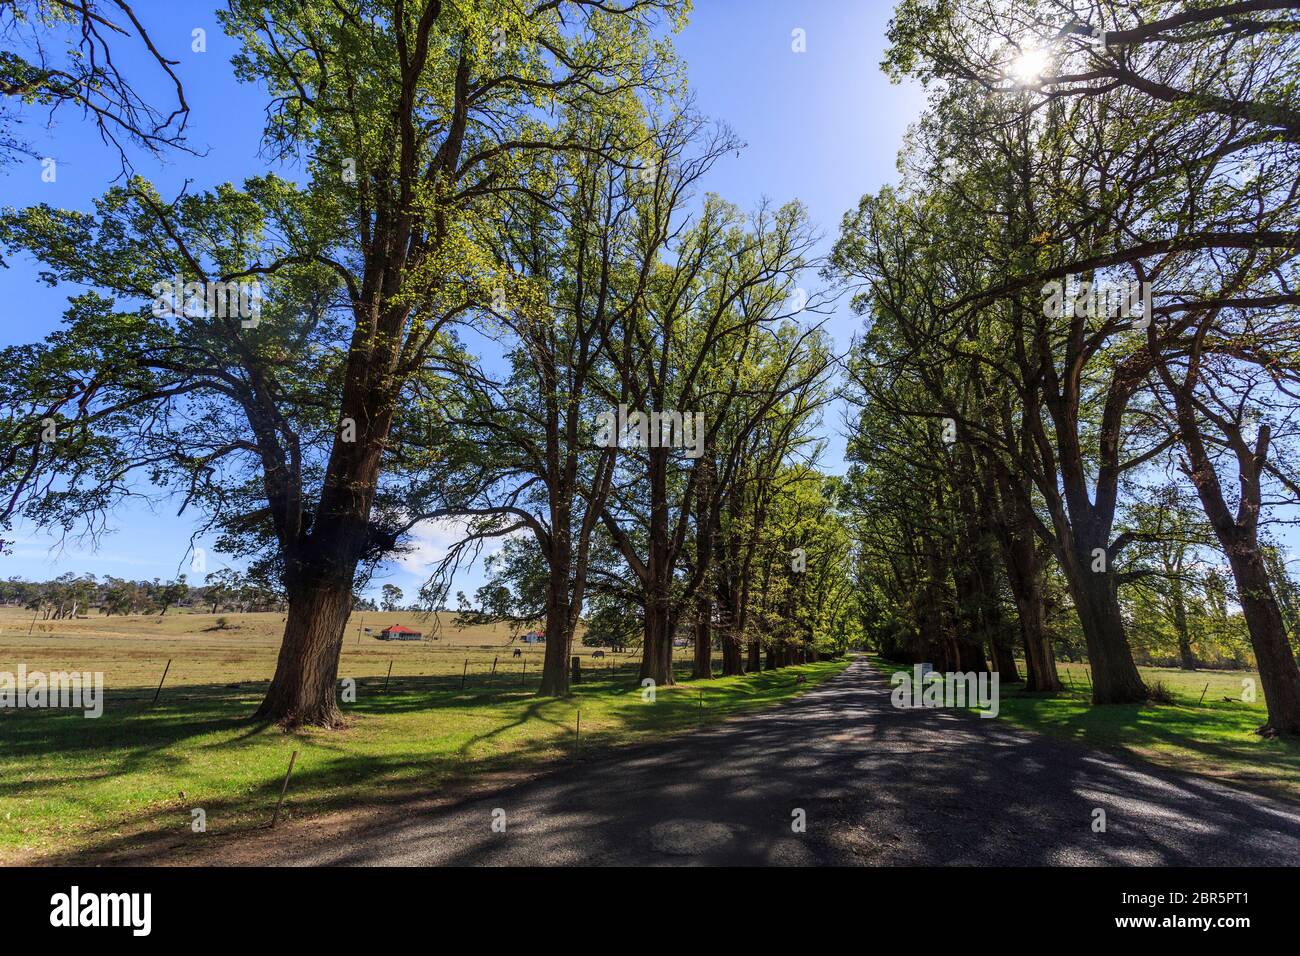 View of the magnificent tree lined avenue of over 200 English Elm trees (Ulmus procera) at Gostwyck Chapel, near Uralla, New South Wales, Australia Stock Photo